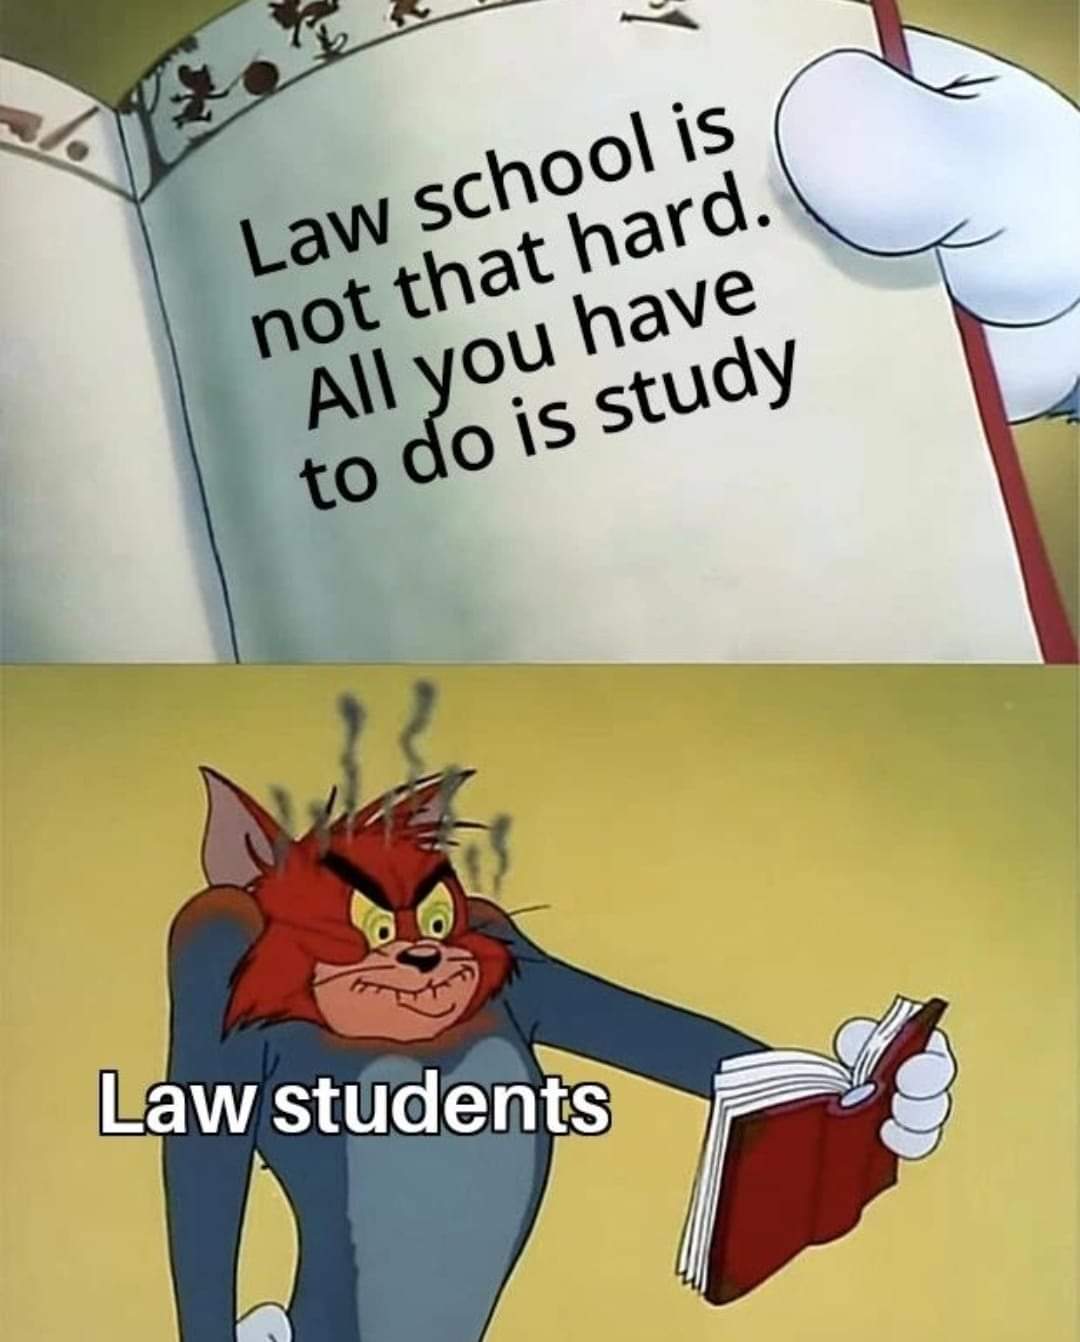 When they say law school is not "that hard"